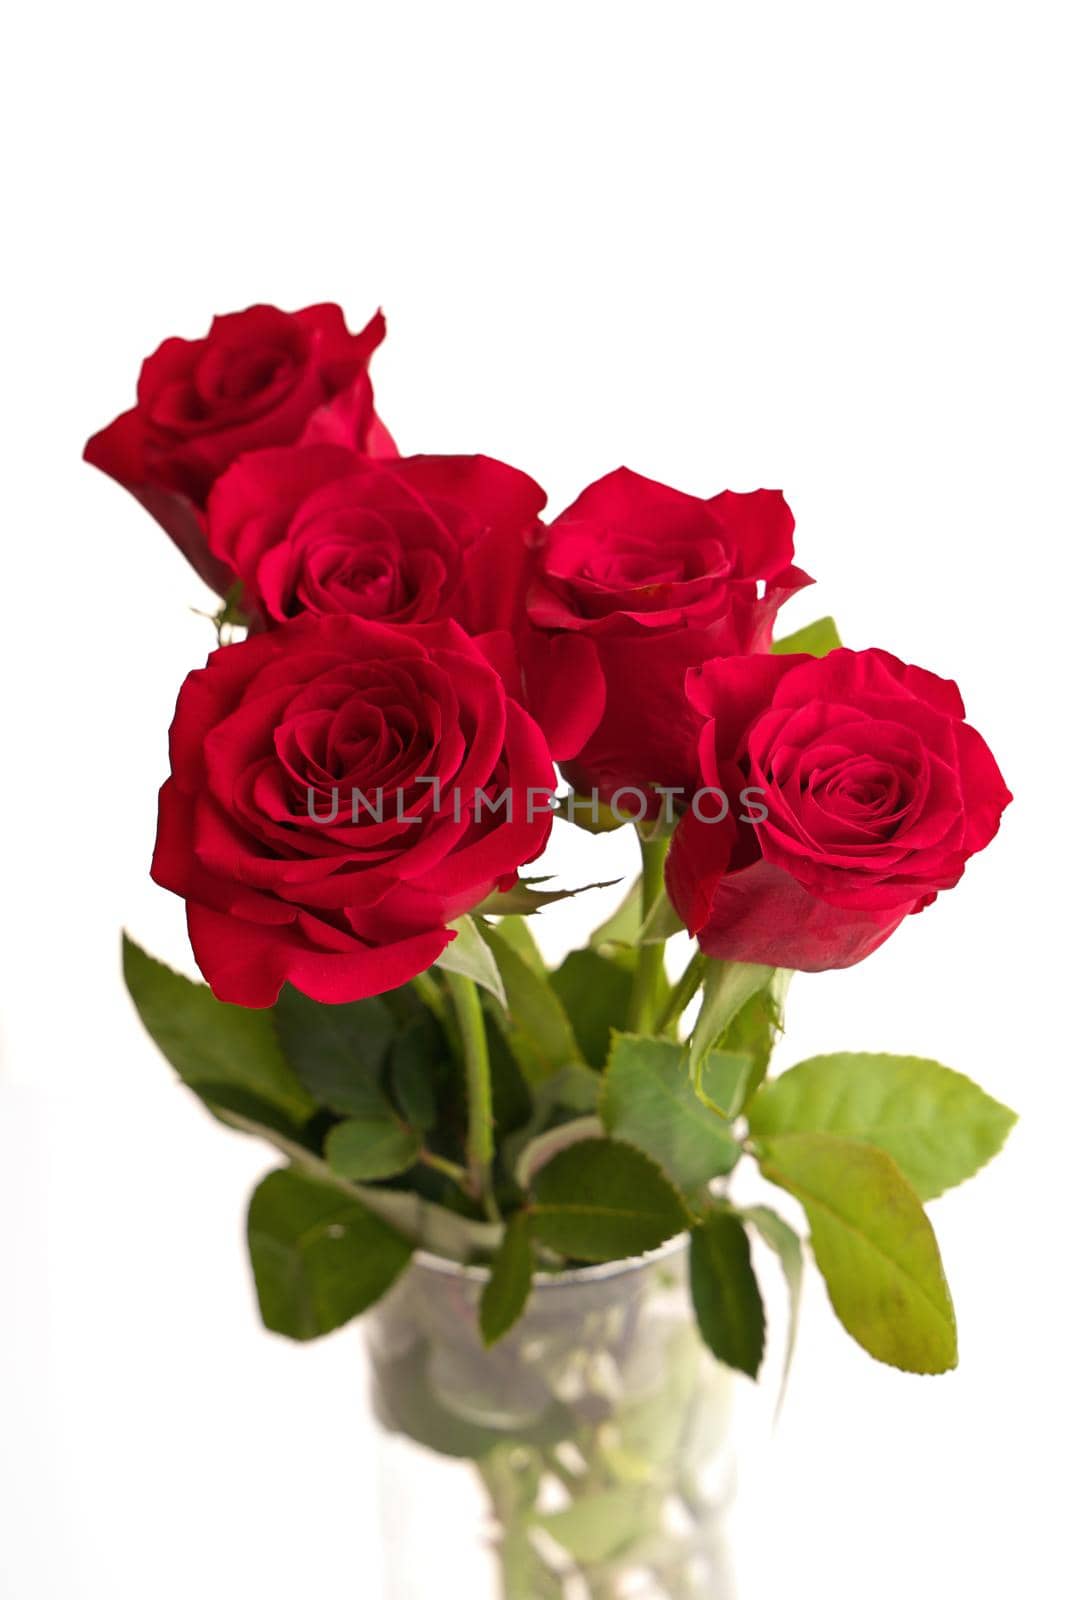 Bouquet of Red Roses in a Vase Isolated on a White Background by markvandam